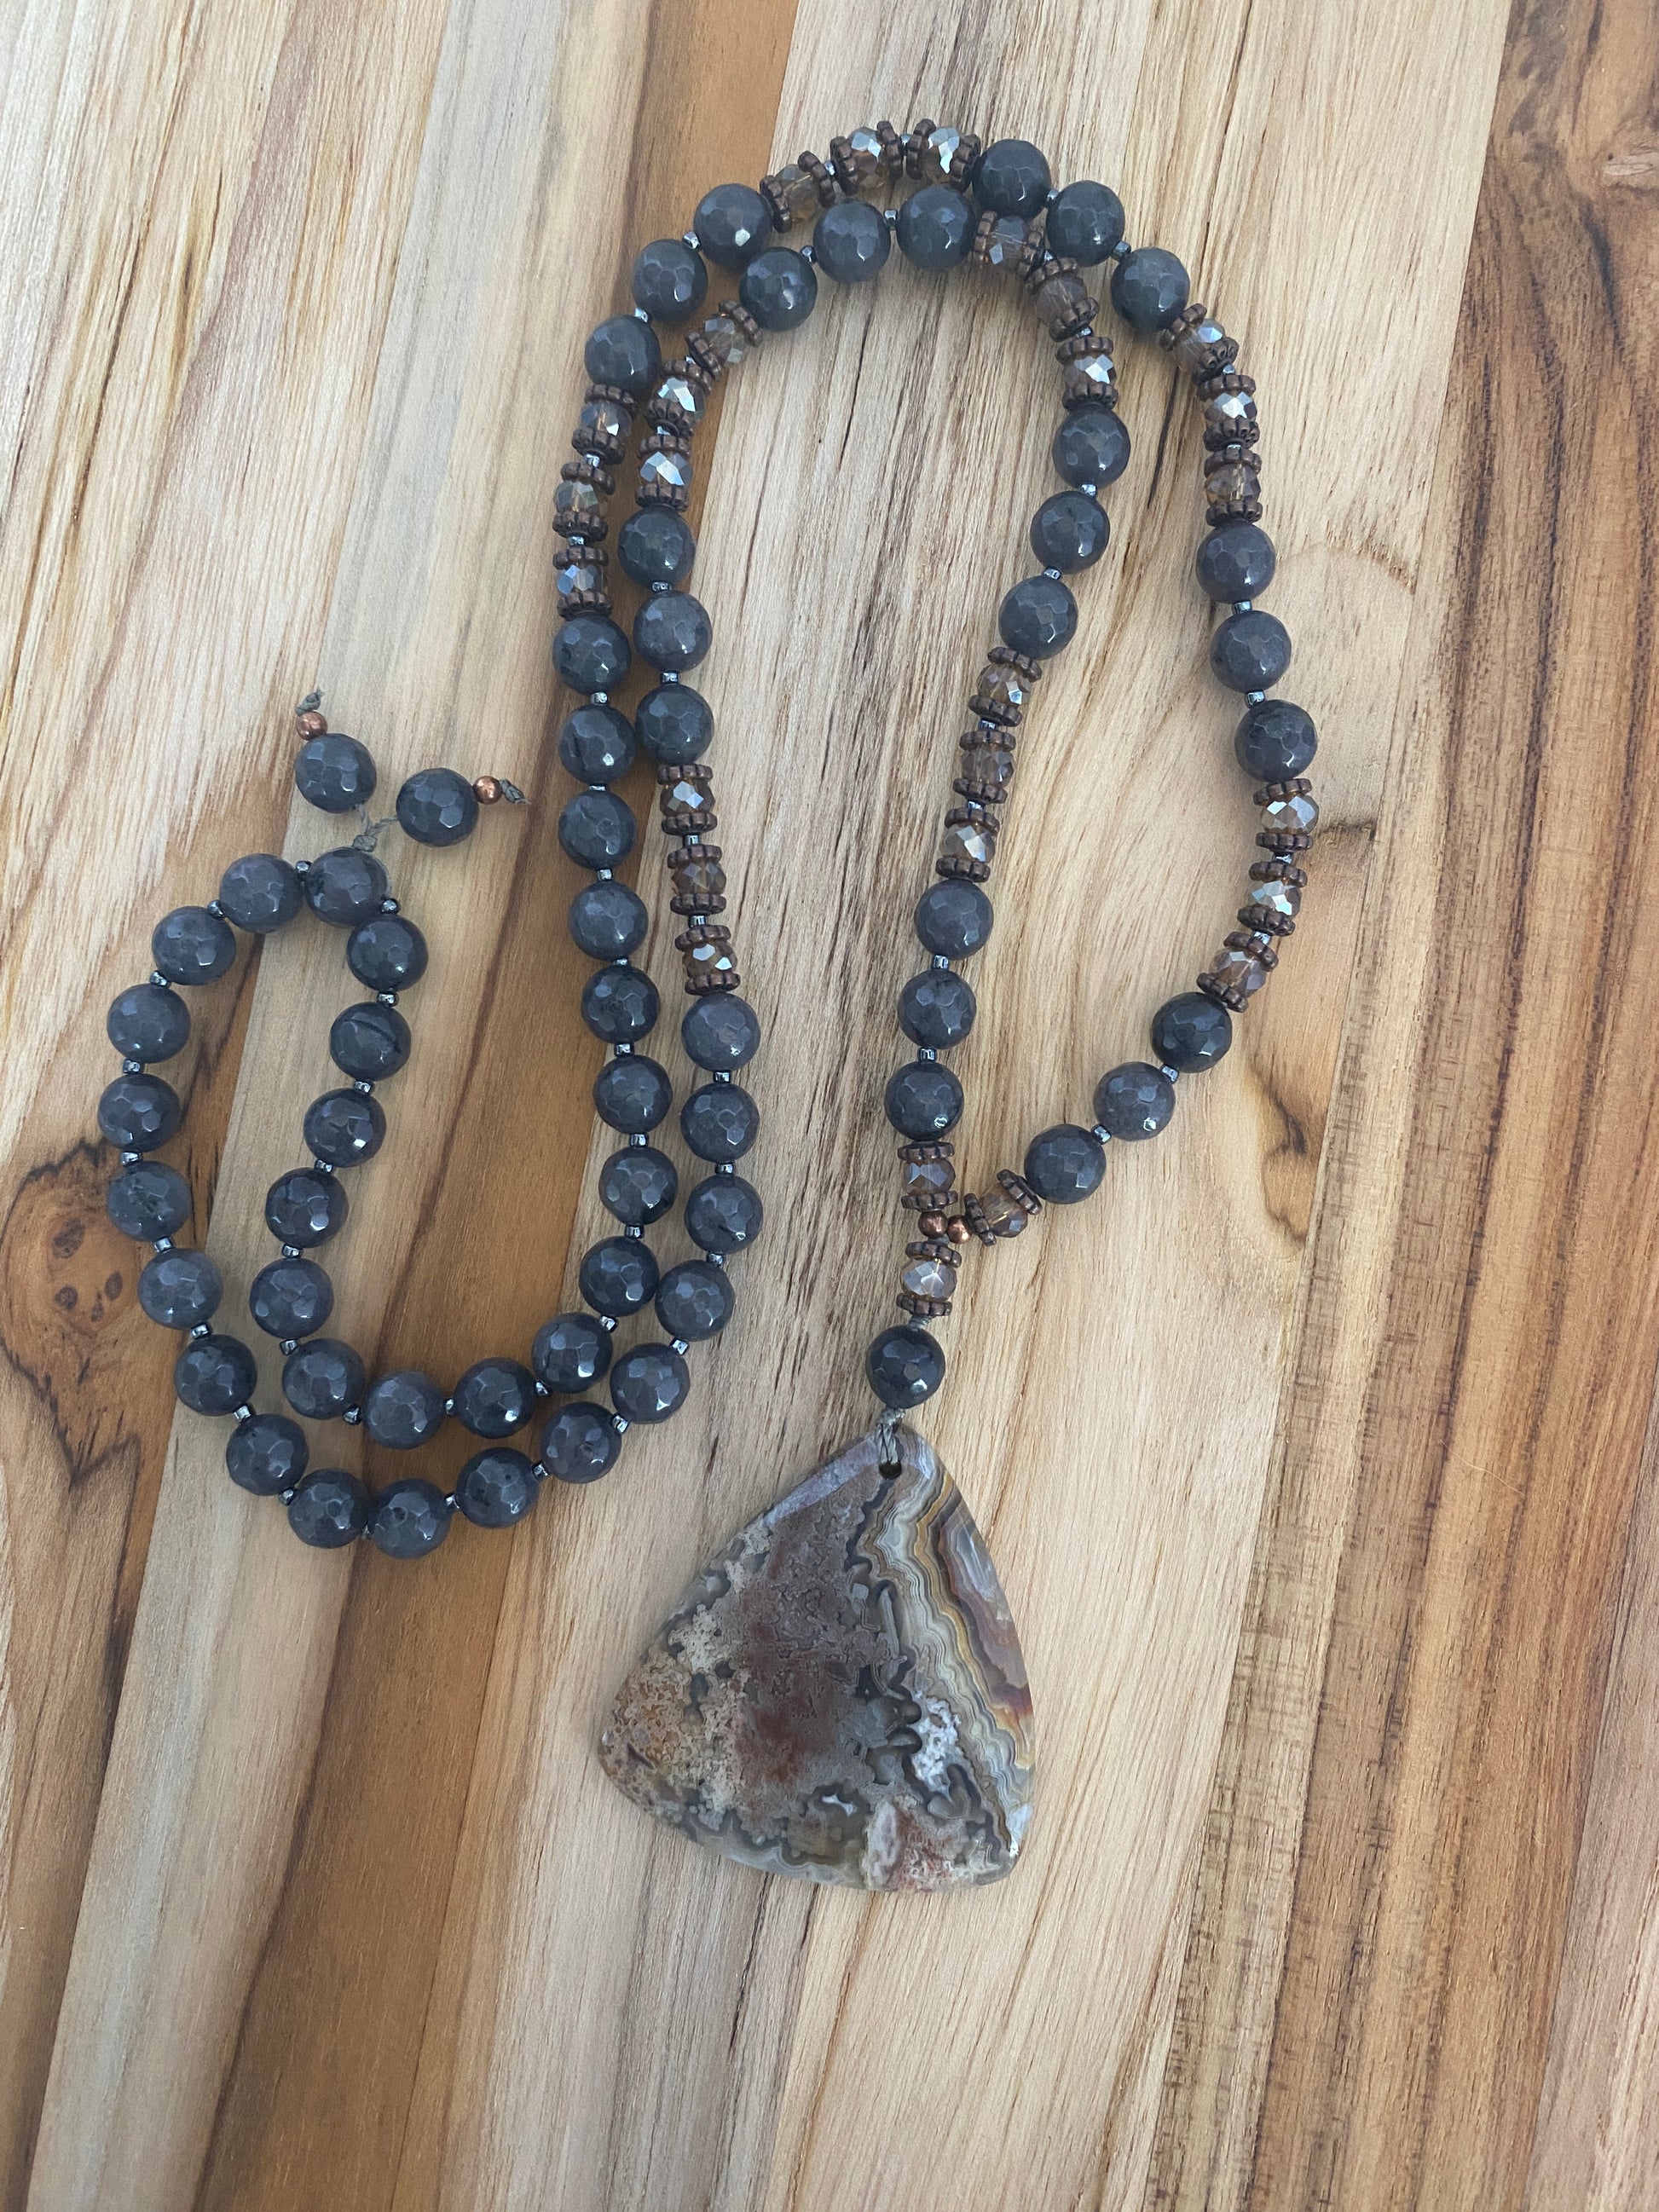 30" Long Crazy Lace Triangle Agate Pendant Necklace with Dark Grey Agate, Crystal & Copper Beads - My Urban Gems